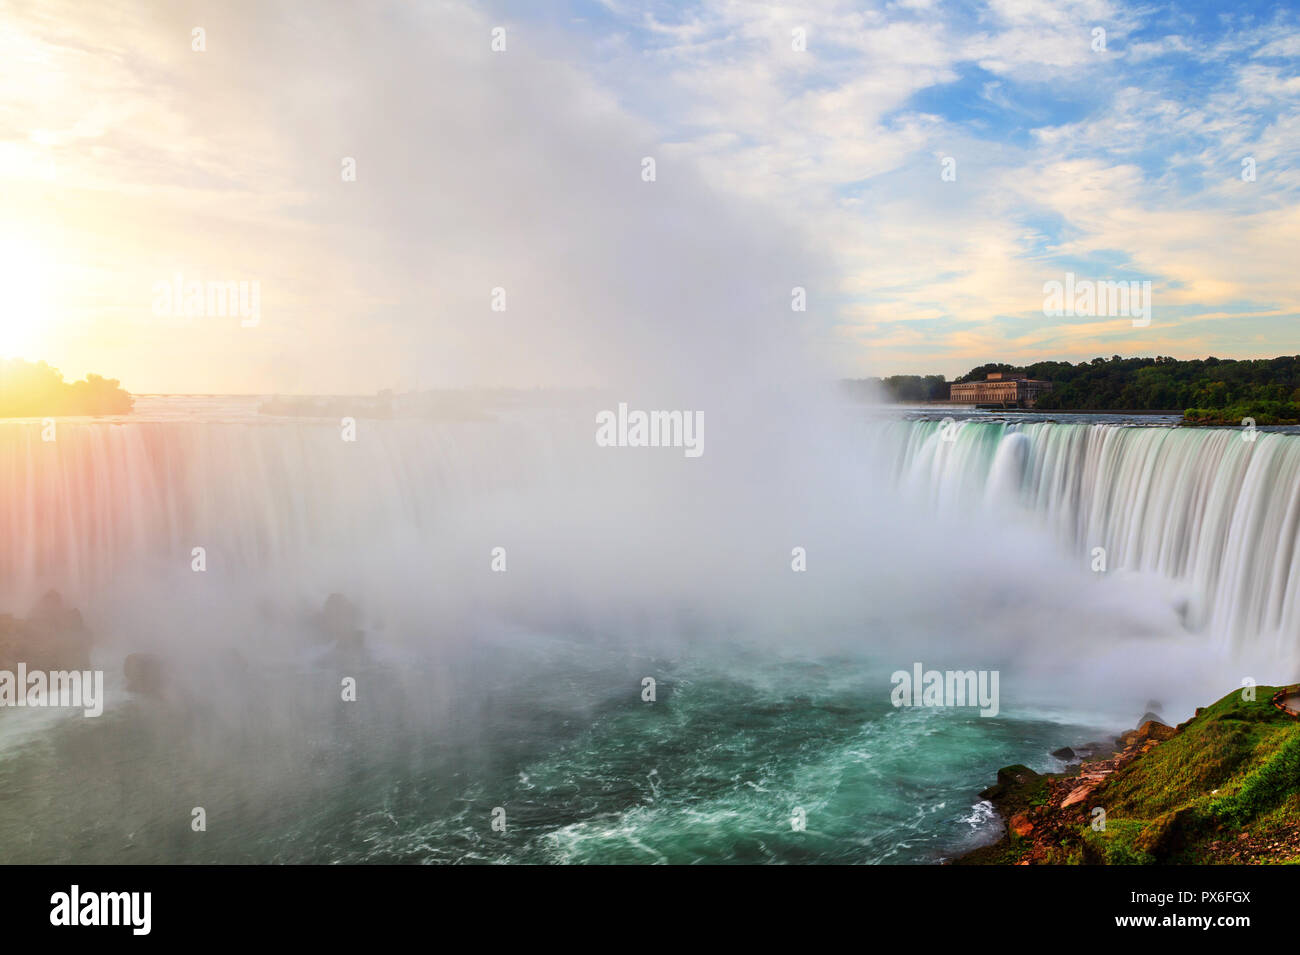 Morning sunrise over Horseshoe Falls at Niagara Falls in Ontario, Canada, showing rising mist from the force of the water's plunge. Stock Photo